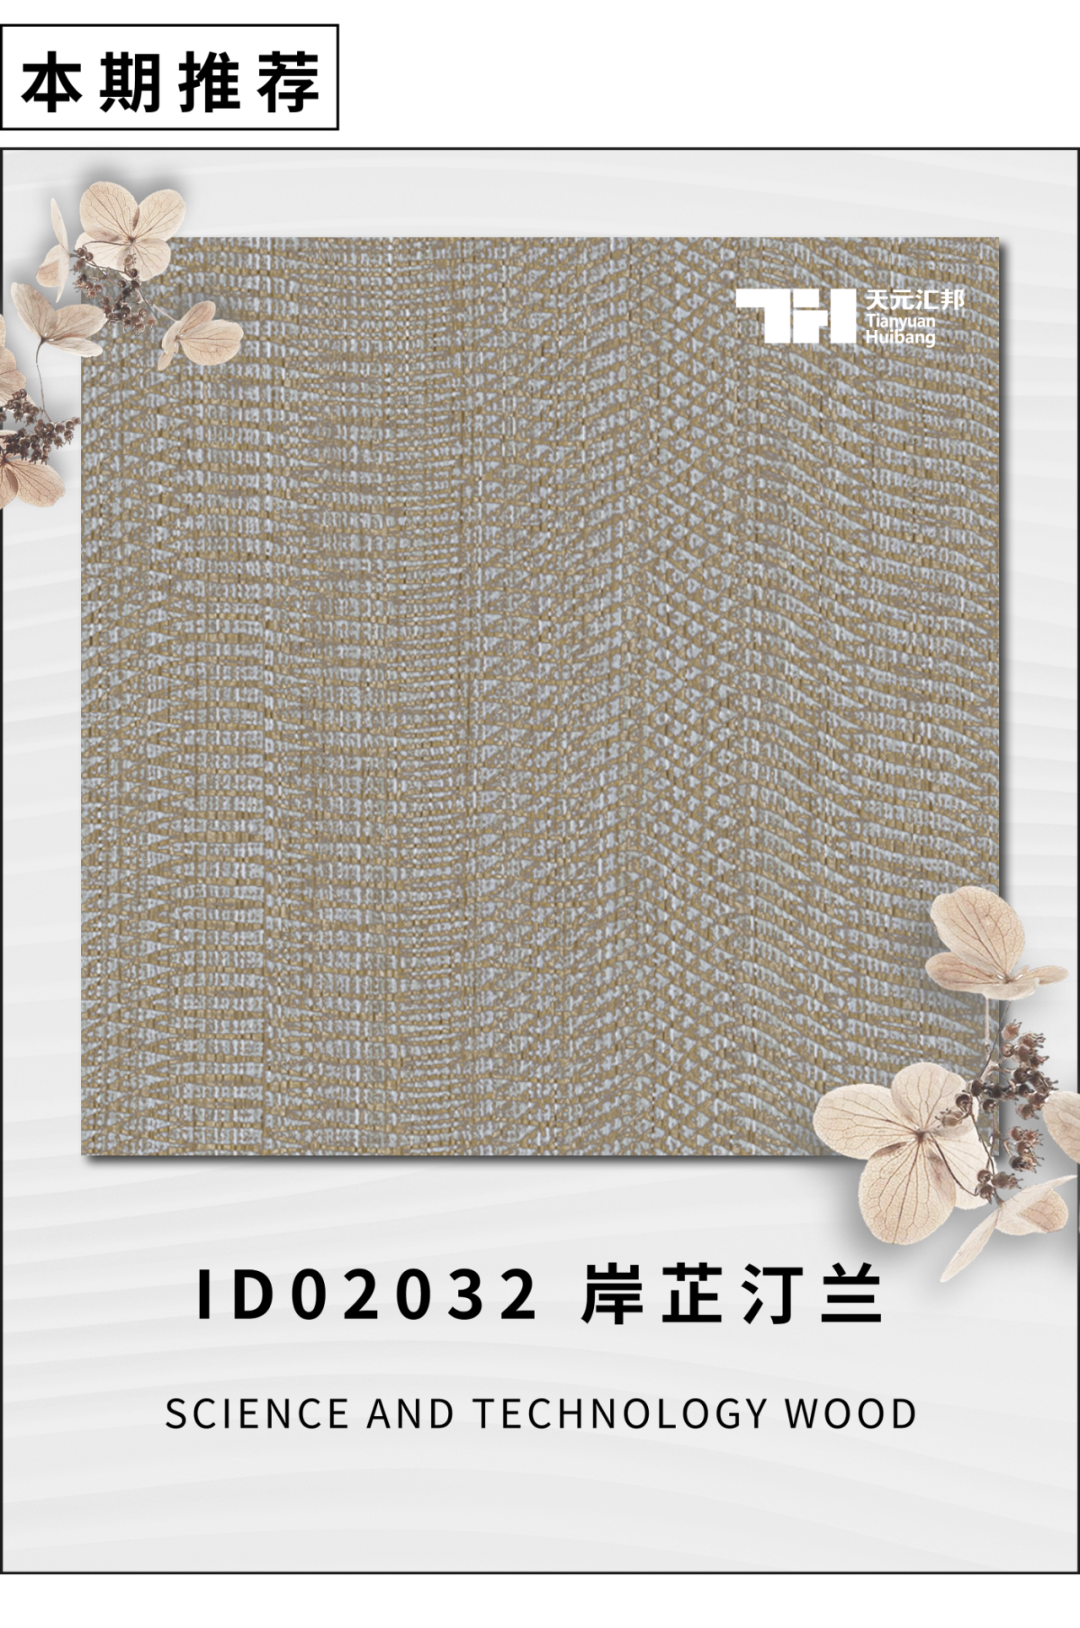 ID02032 岸芷汀蘭 Science and technology wood